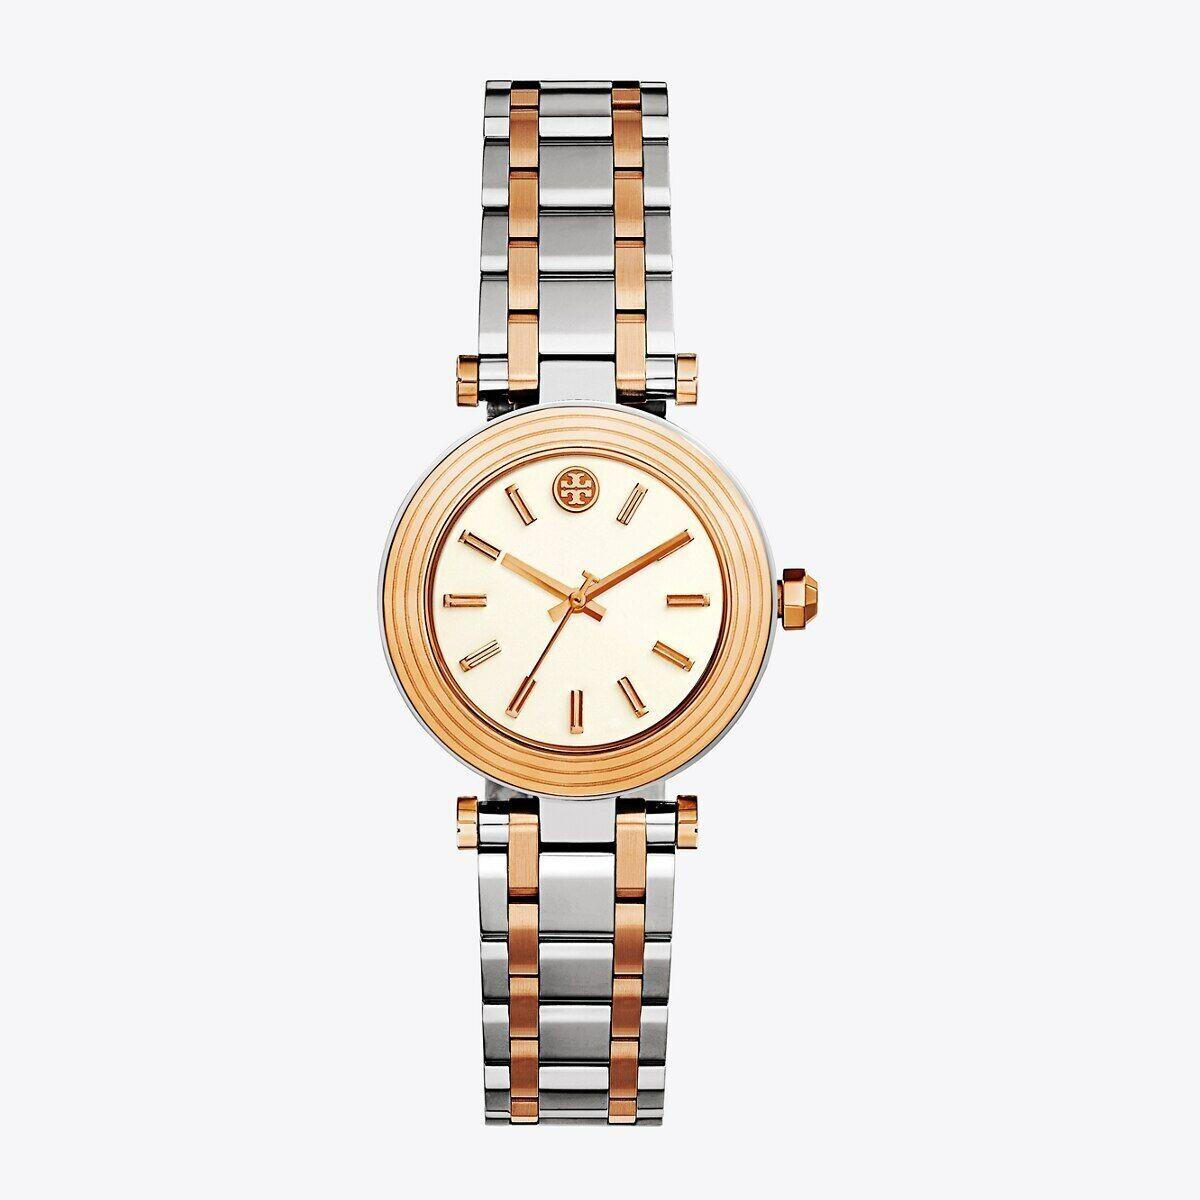 Tory Burch Women`s Classic T Rose Gold Silver Stainless White Dial Watch TBW9011 - White Dial, Silver Band, Silver Bezel